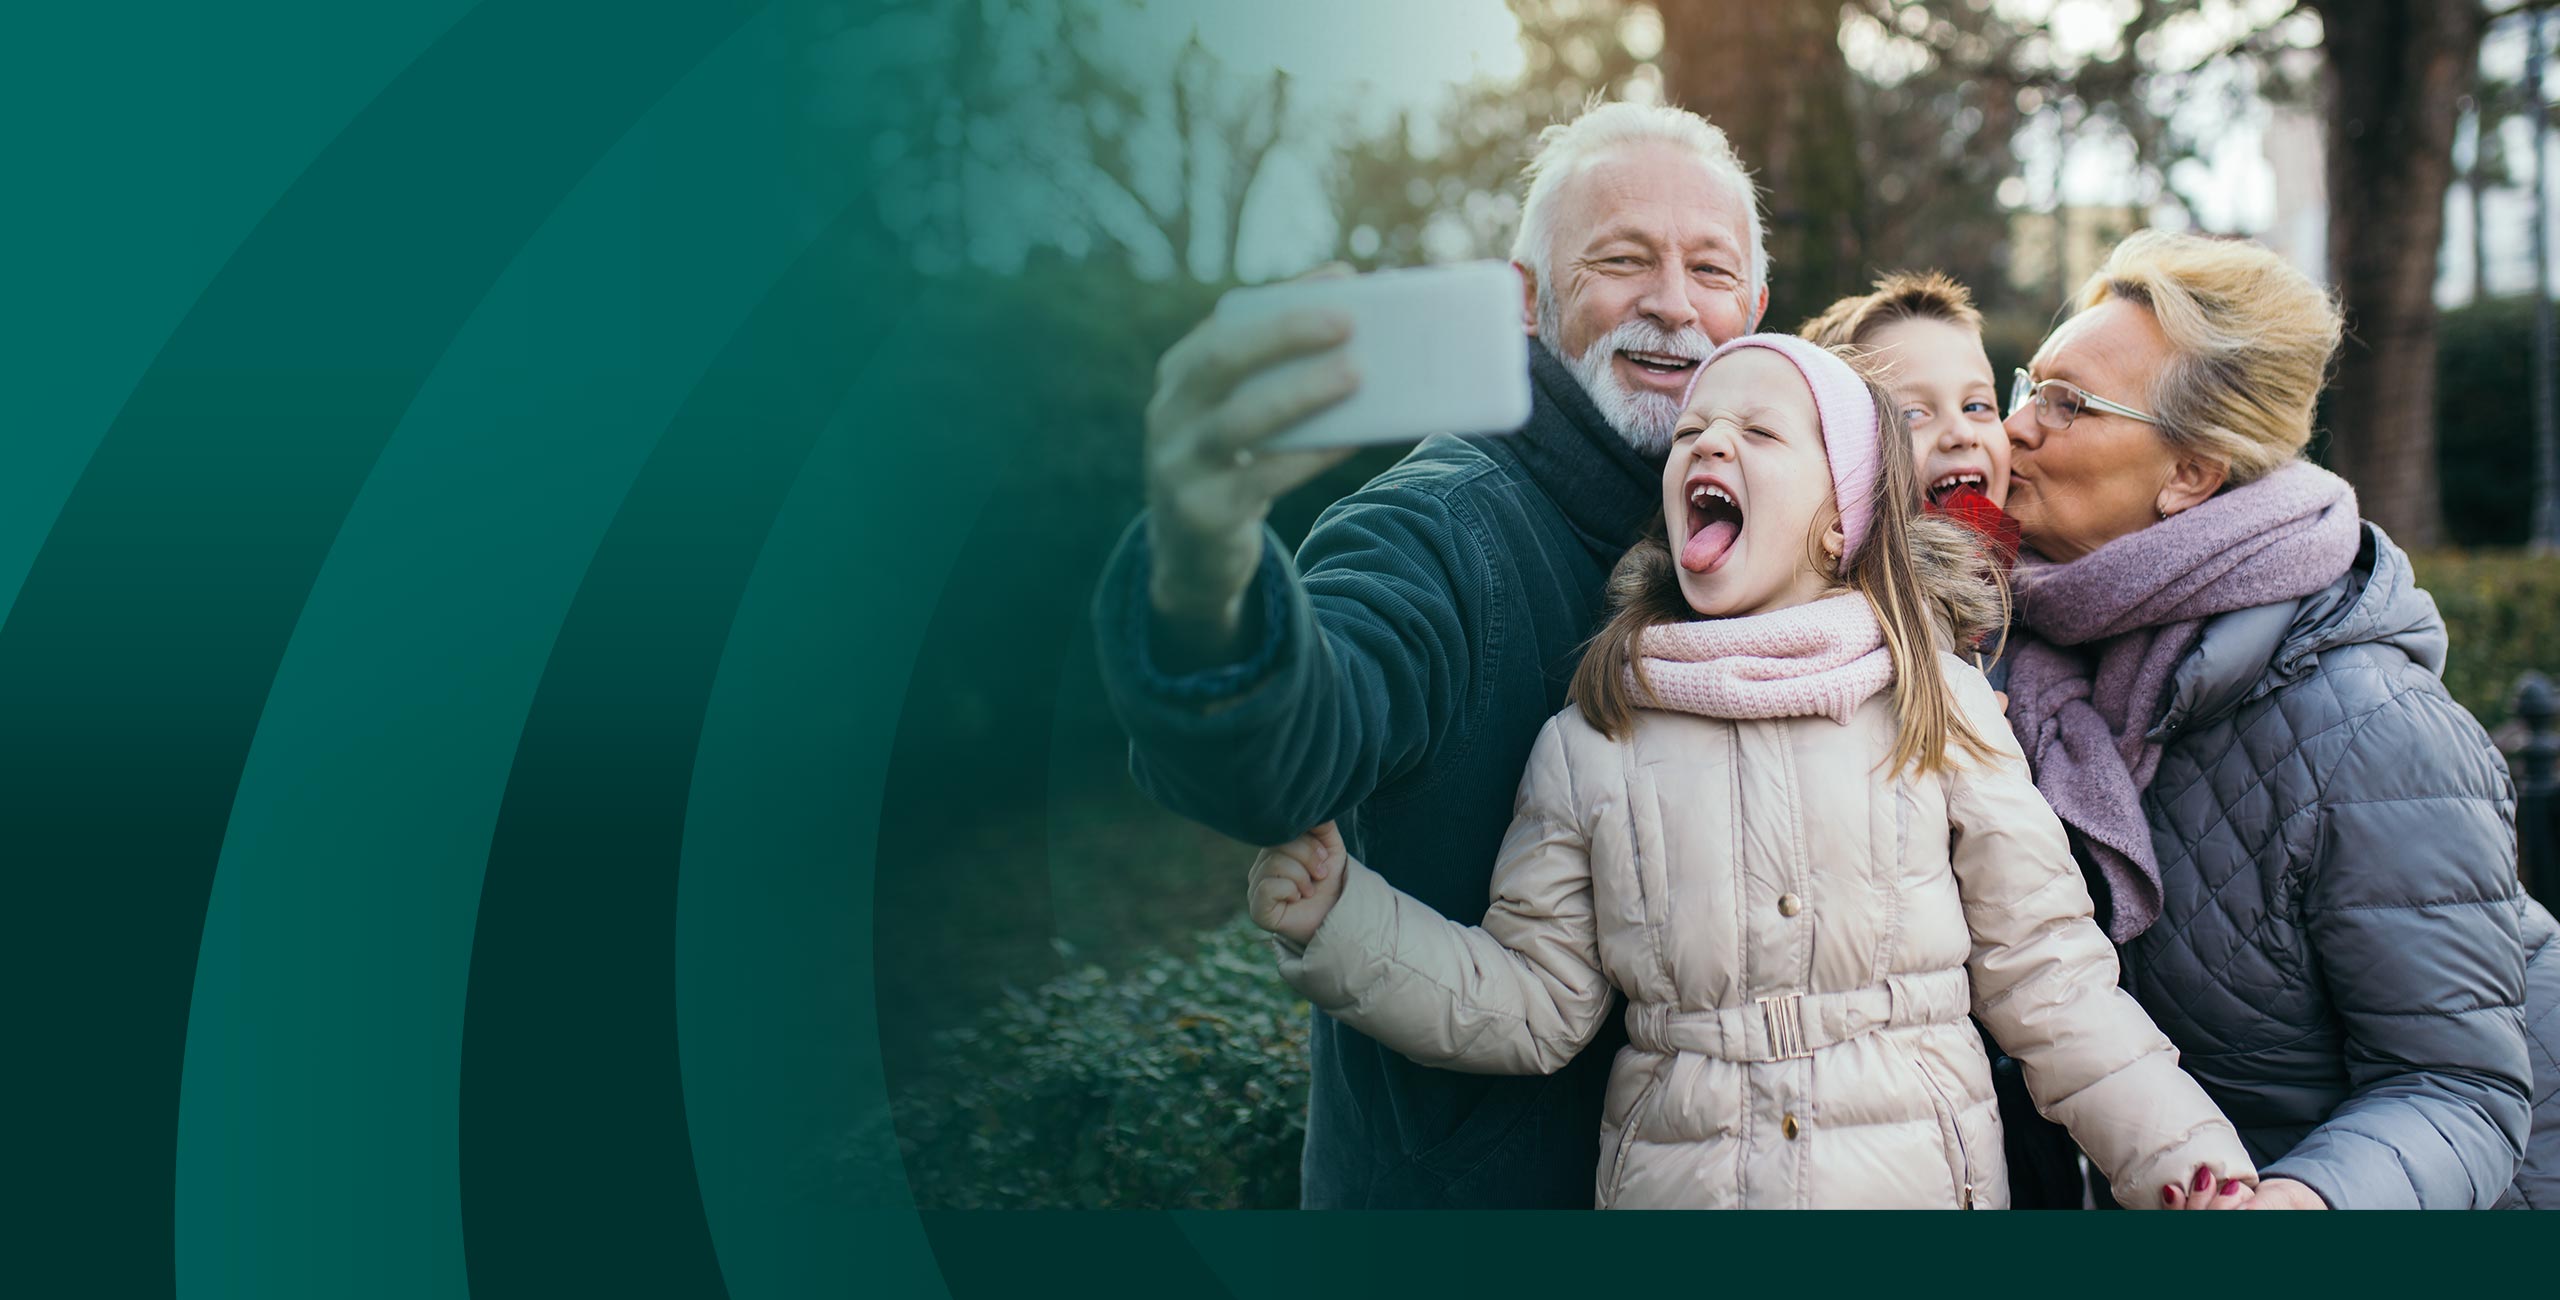 Grandparents taking selfie with boy and girl outdoors.